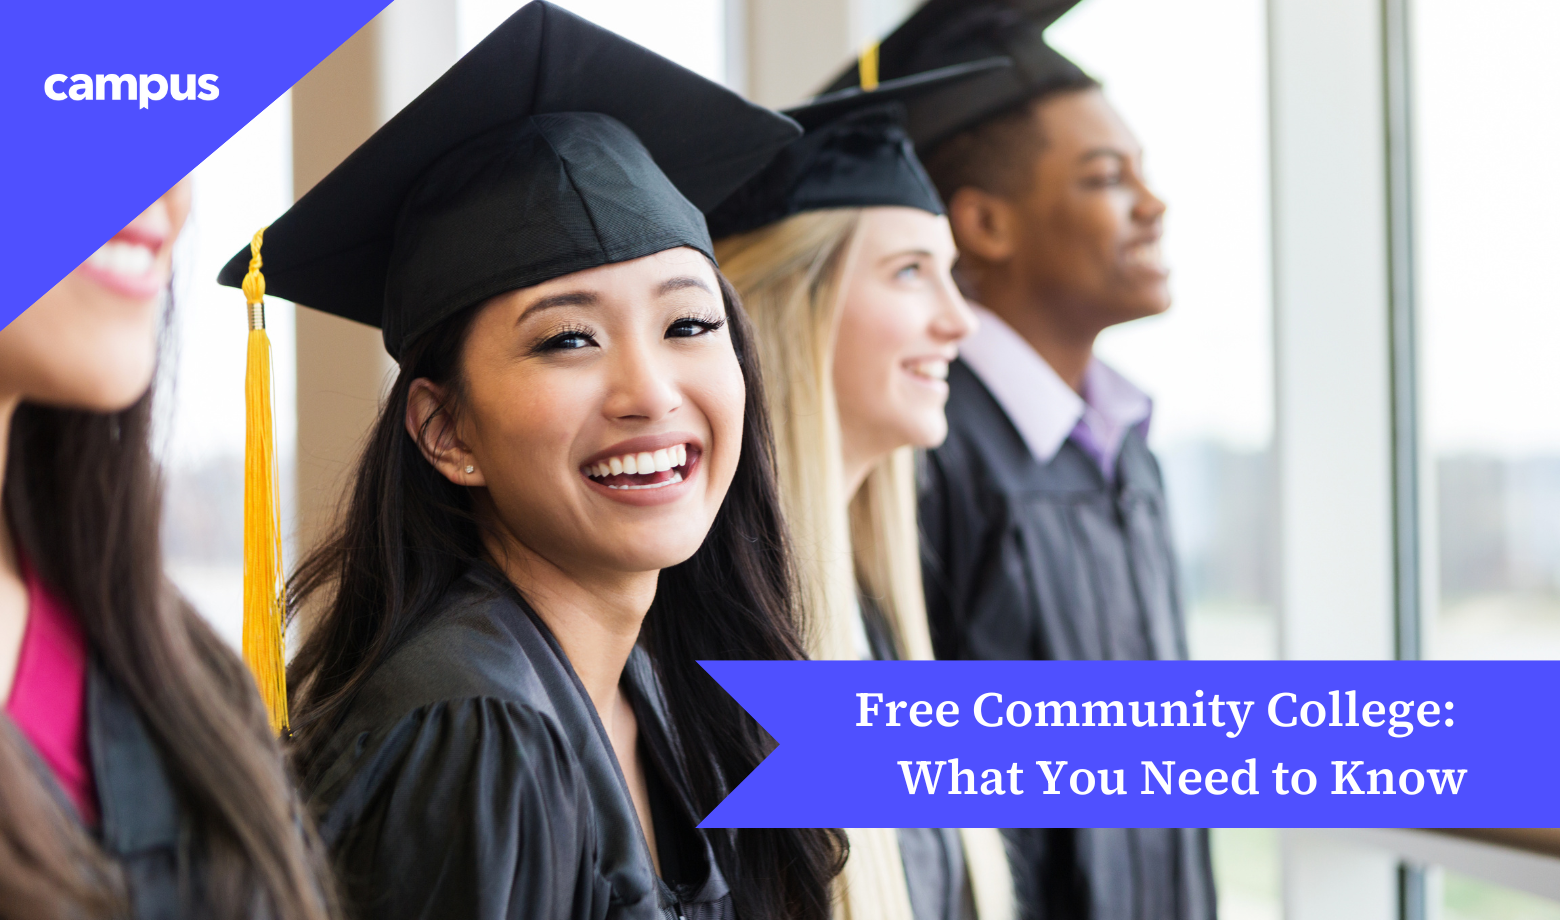 Is Community College Free? What You Need to Know